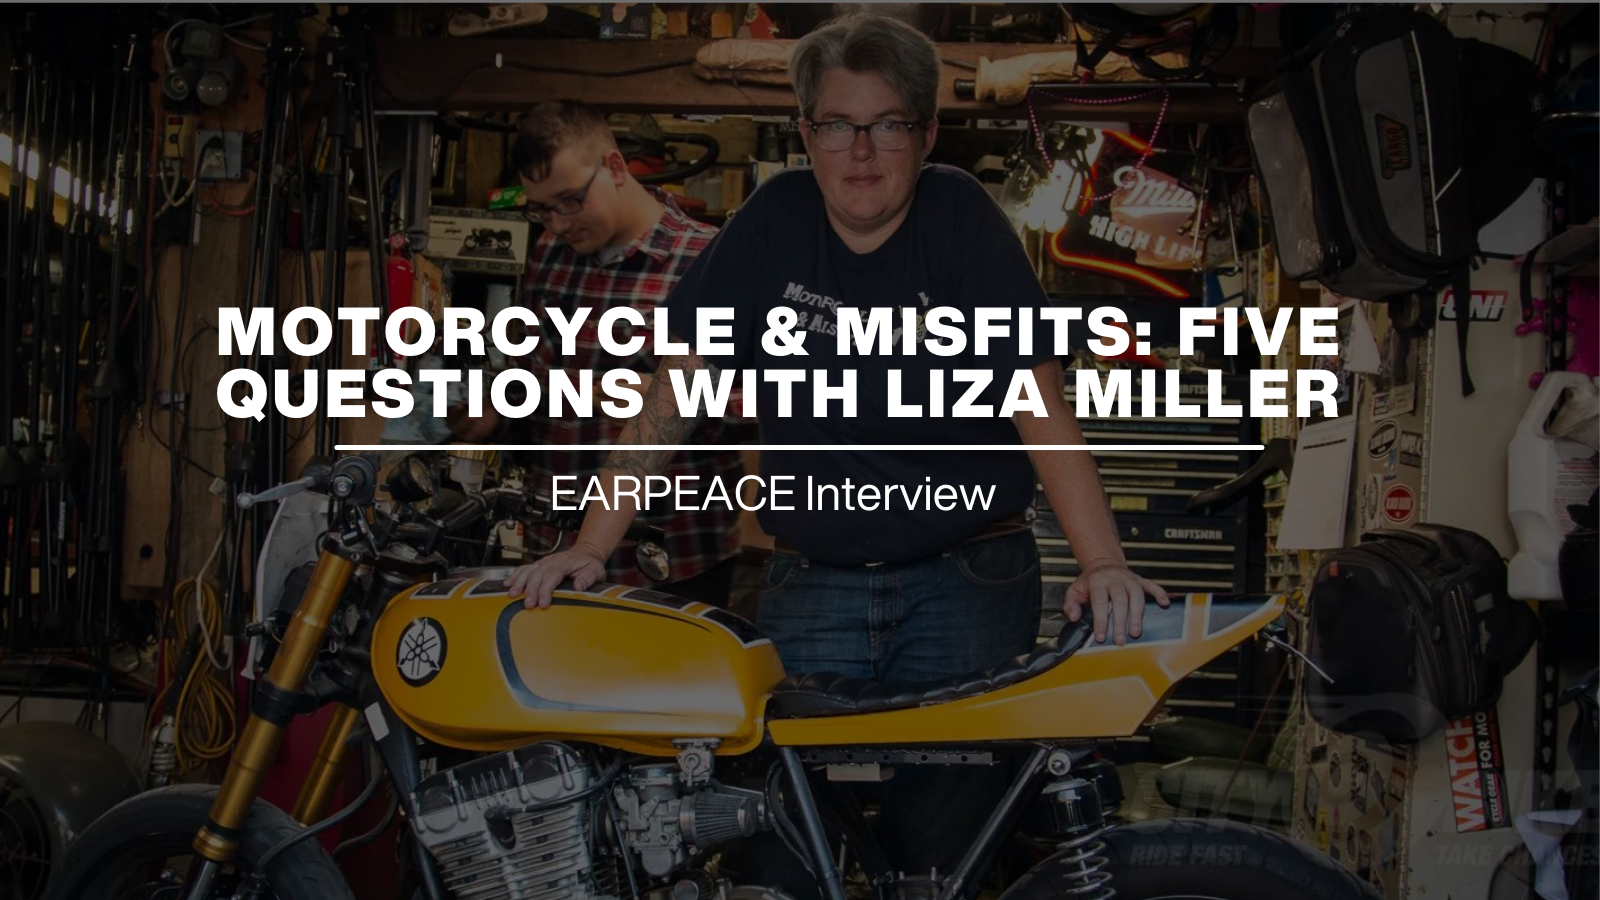 motorcycle and misfits: five questions with Liza miller